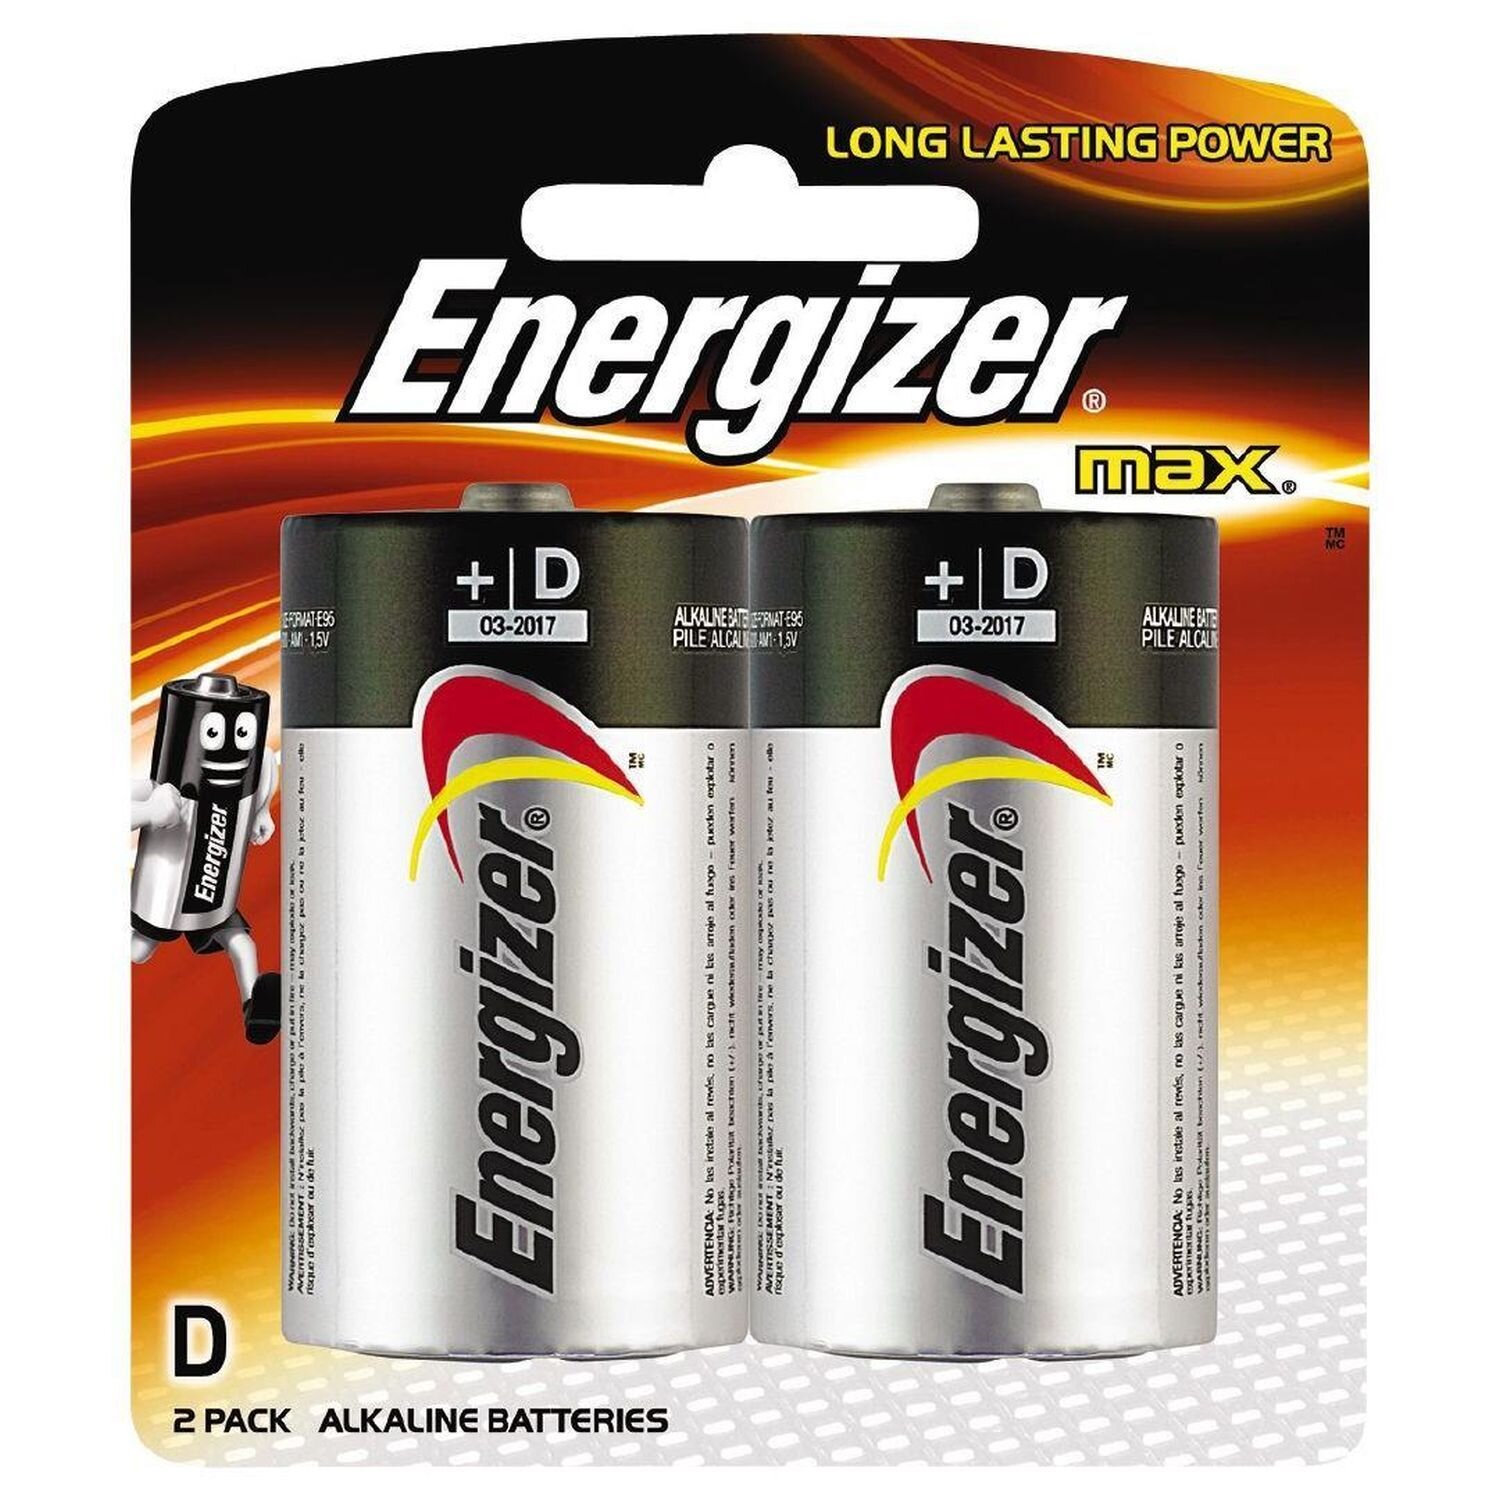 Energizer Max D Battery Packet 2